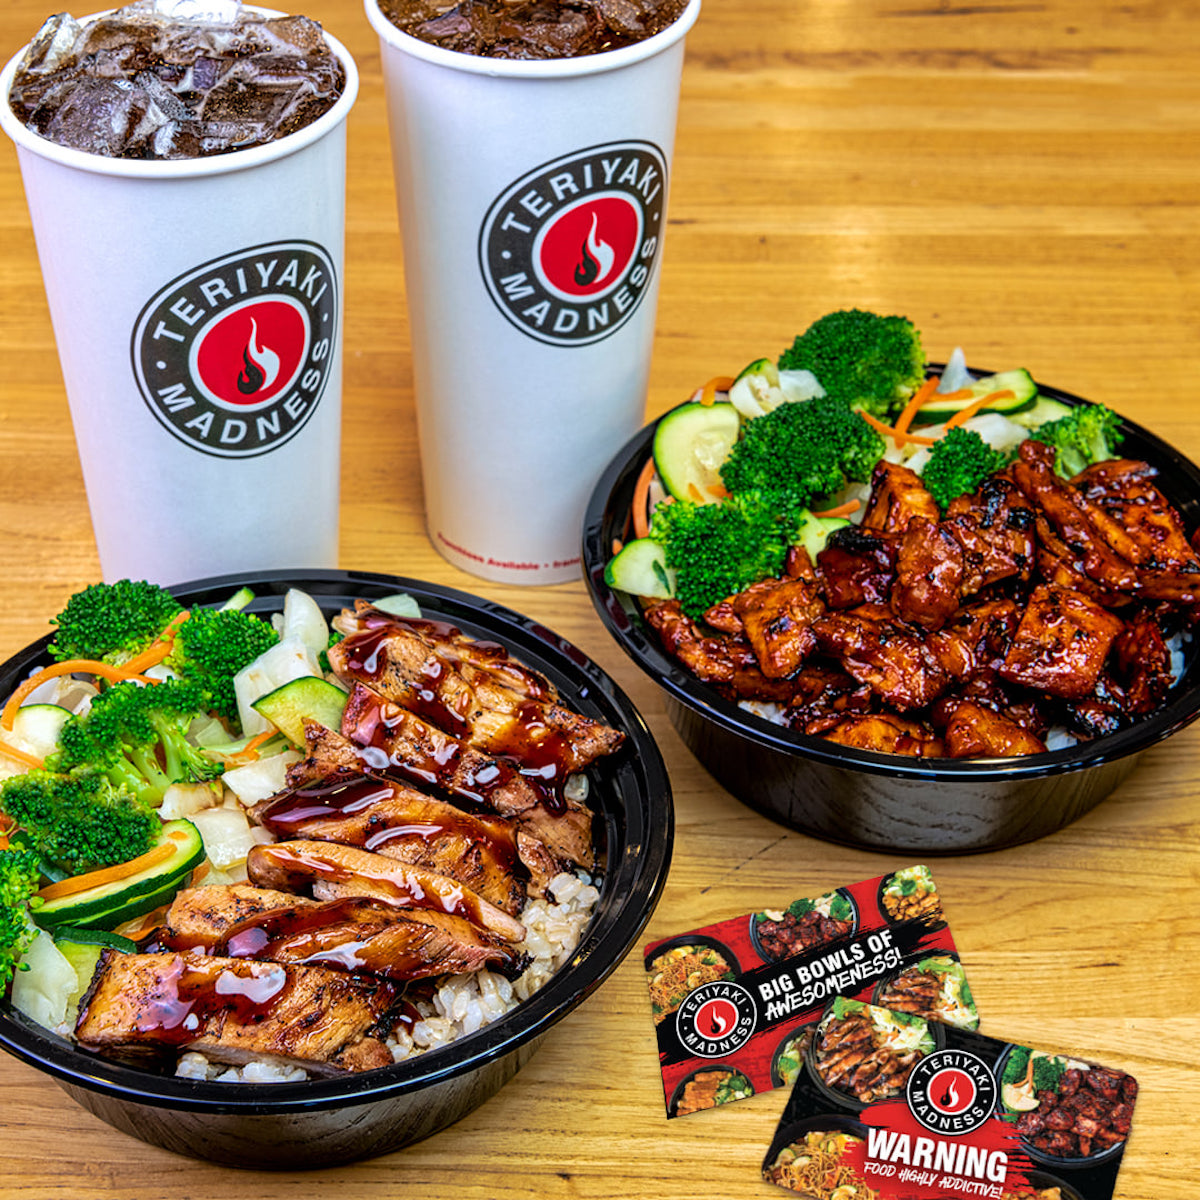 Teriyaki Madness to Open Its First Atlanta Franchise